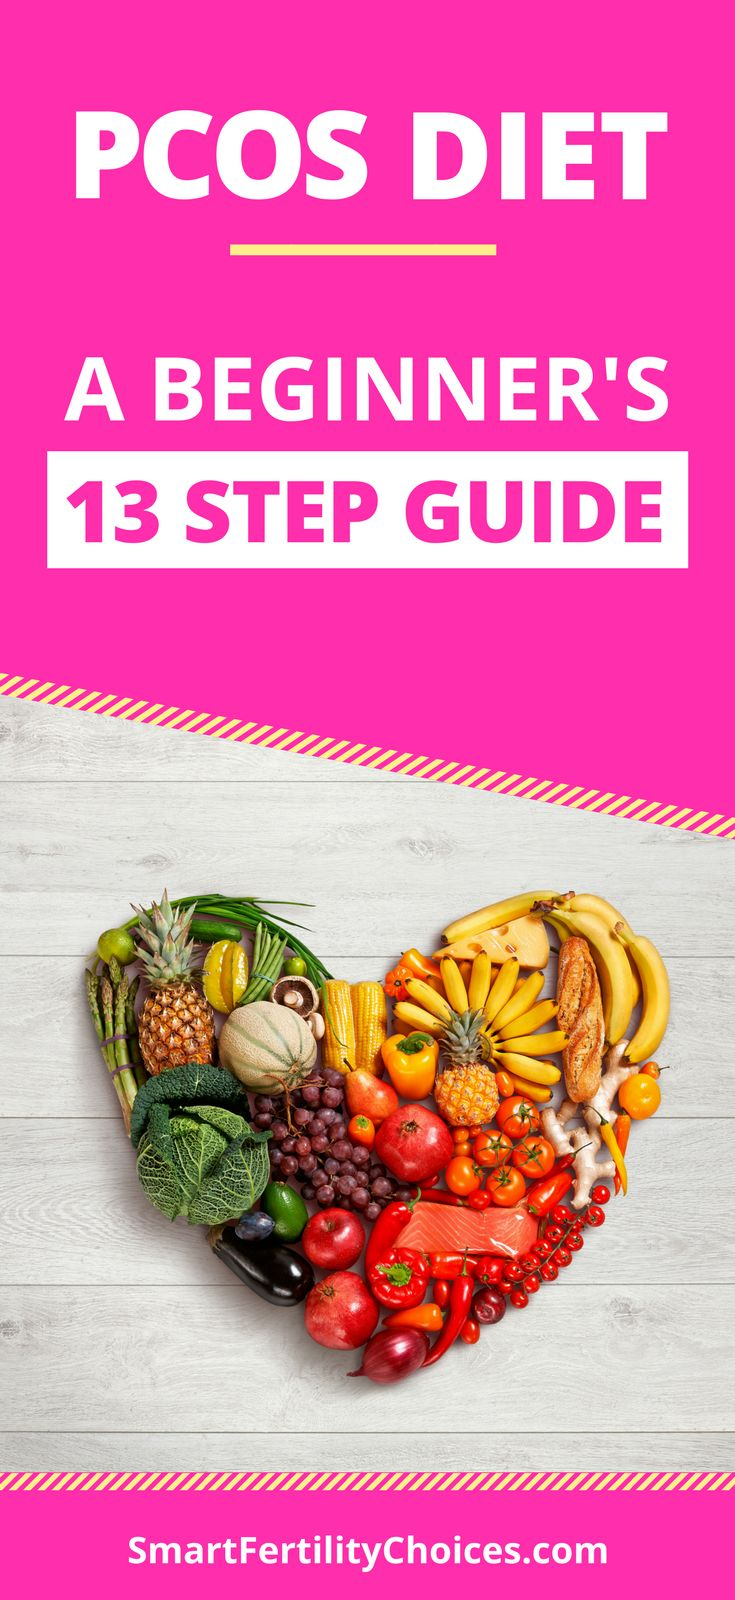 PCOS Diet Do s And Don ts A Beginner s 13 Step Guide Pcos Recipes 